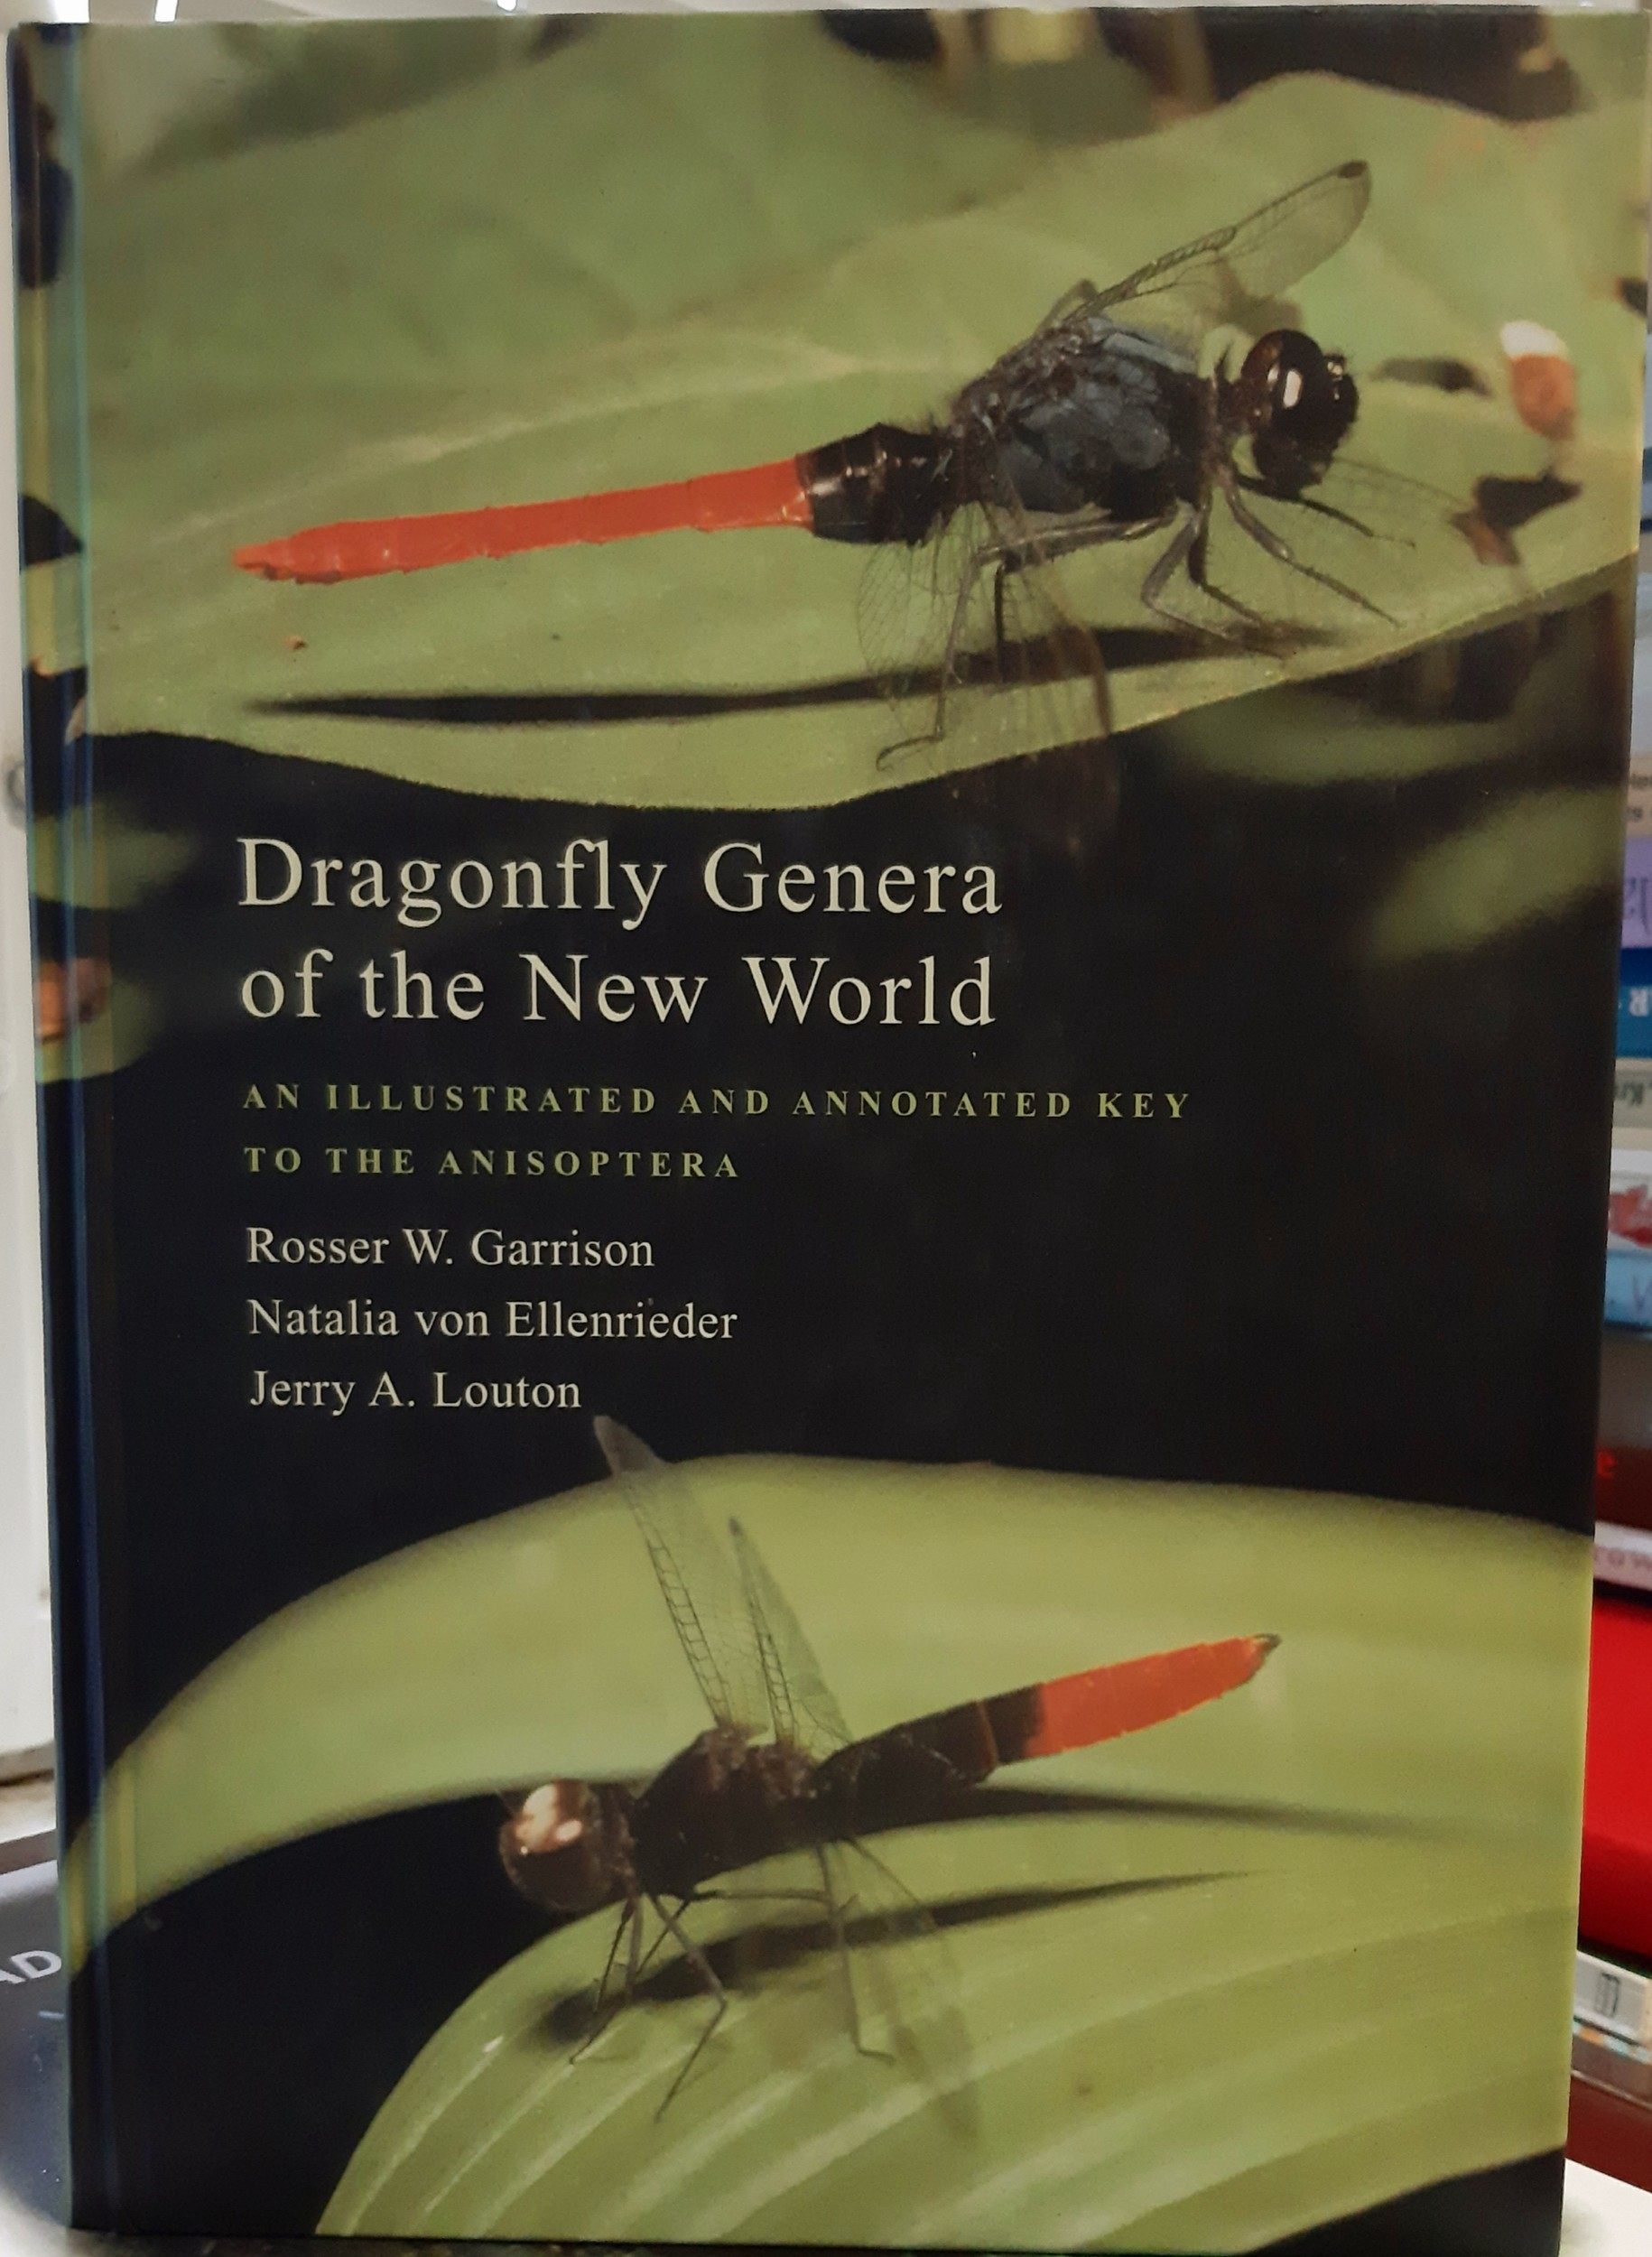 Rosser W. Garrison; Natalia von Ellenrieder; Jerry A. Louton: Dragonfly Genera of the New World. An illustrated and annotated key to the Anisoptera (Rippl-Rónai Múzeum CC BY-NC-ND)